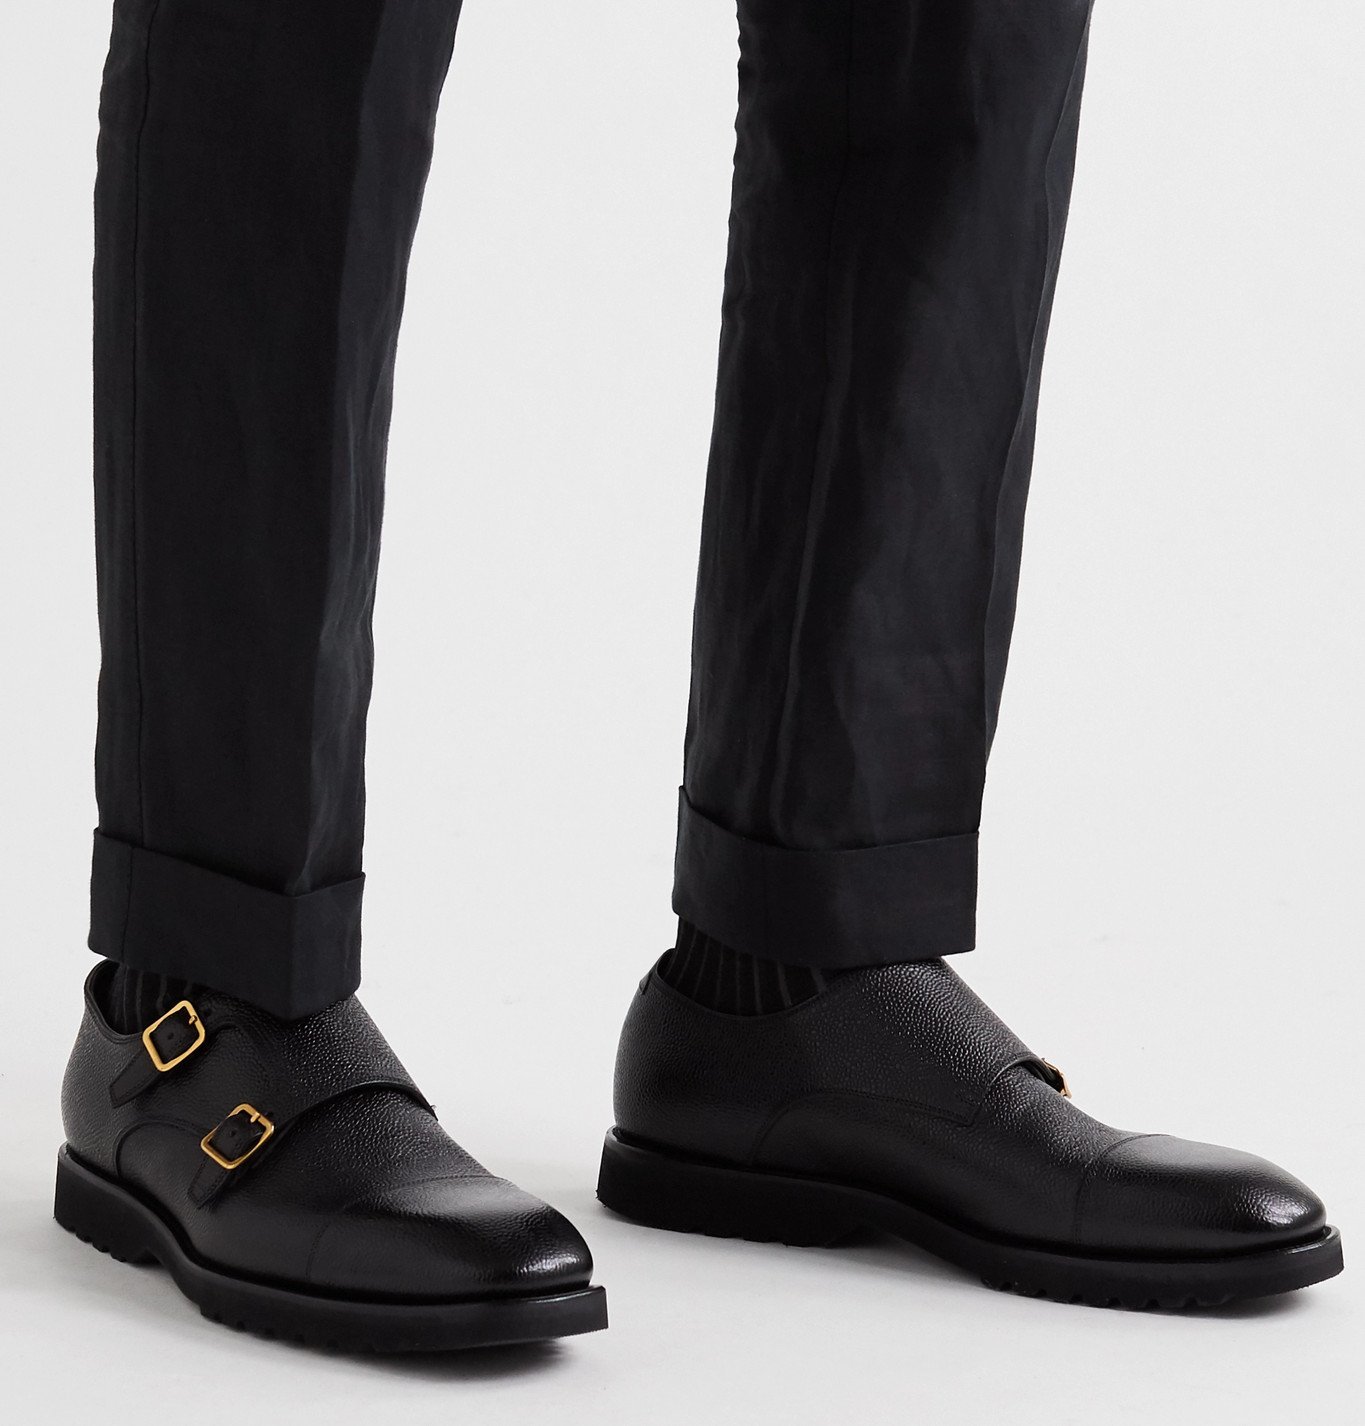 TOM FORD - Pebble-Grain Leather Monk-Strap Shoes - Black TOM FORD